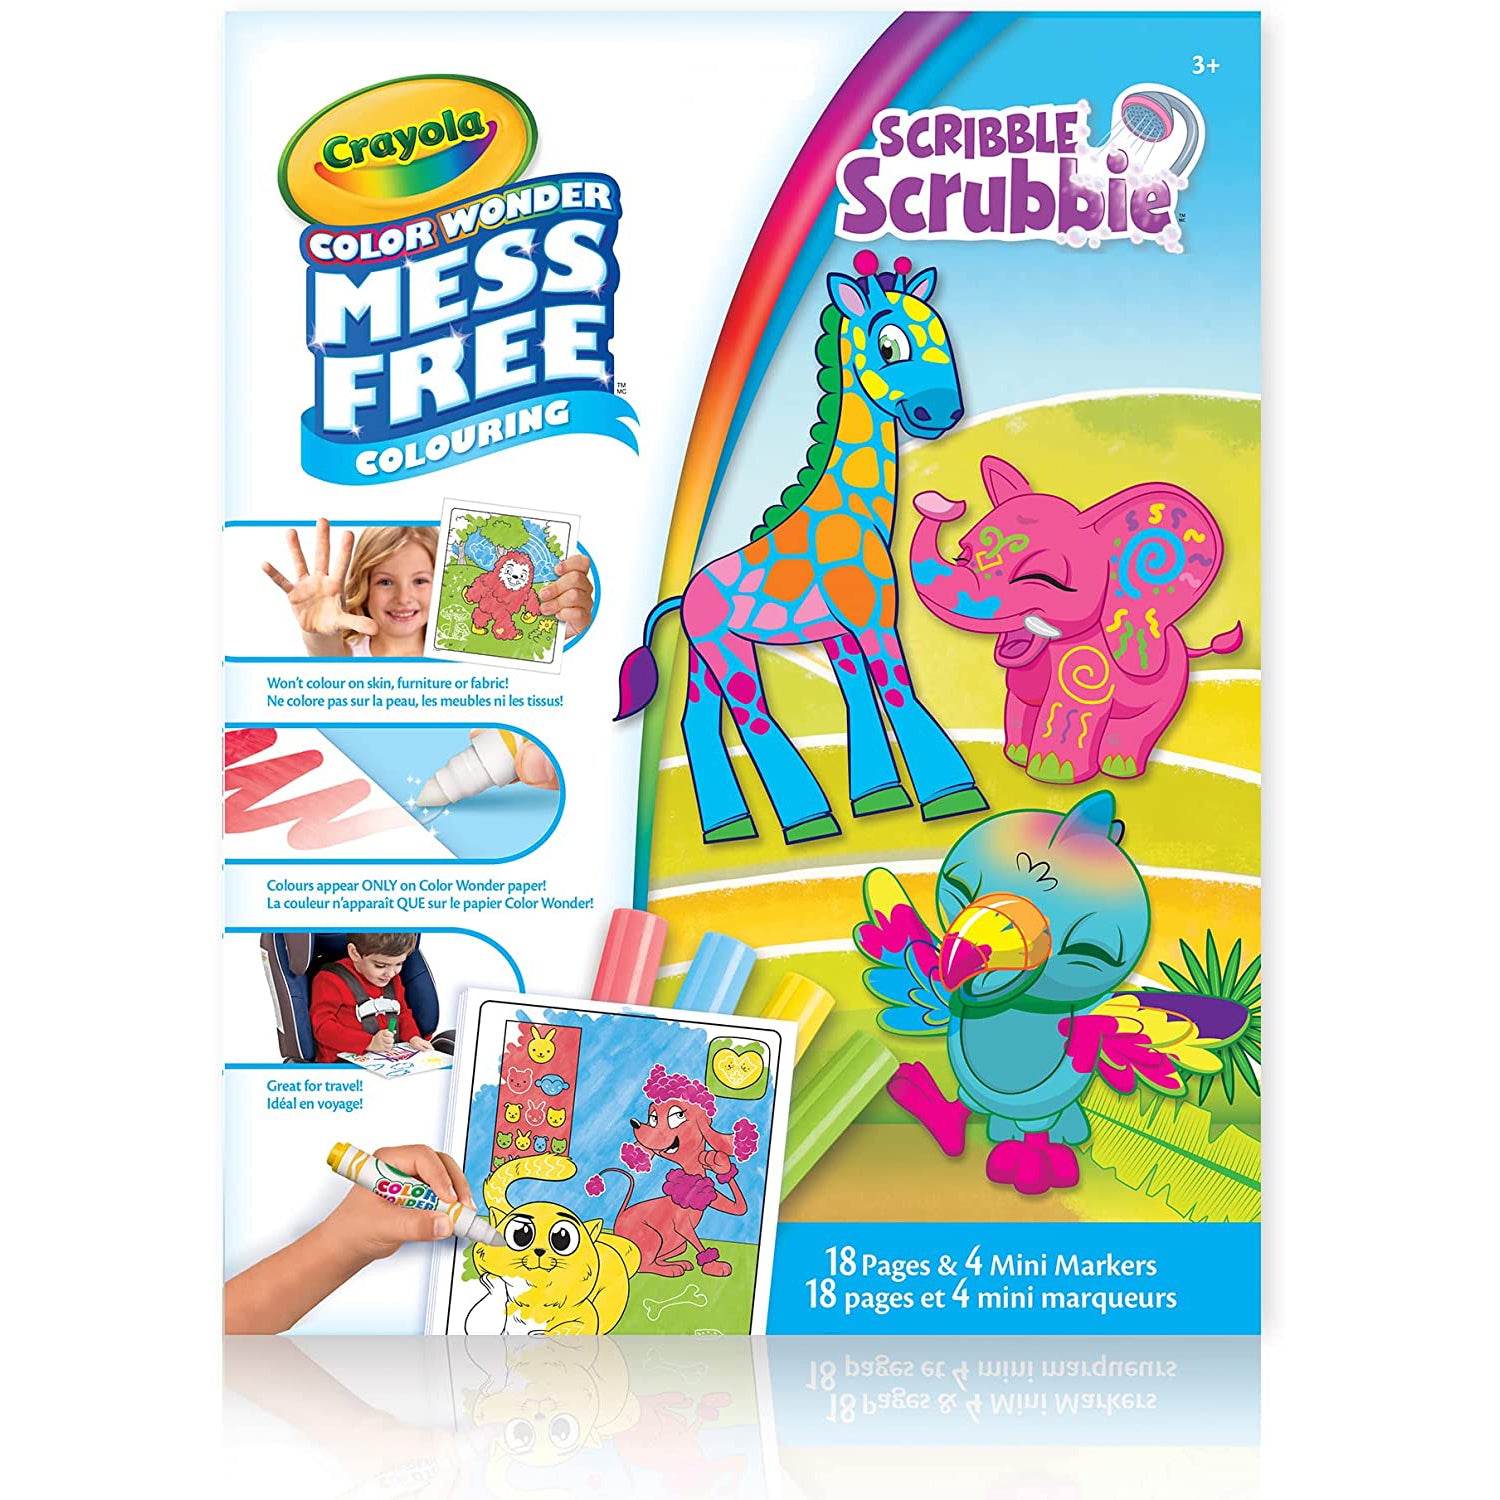 Crayola Color Wonder Mess-Free Coloring Pages & Mini Markers - Scribble Scrubbie Pets